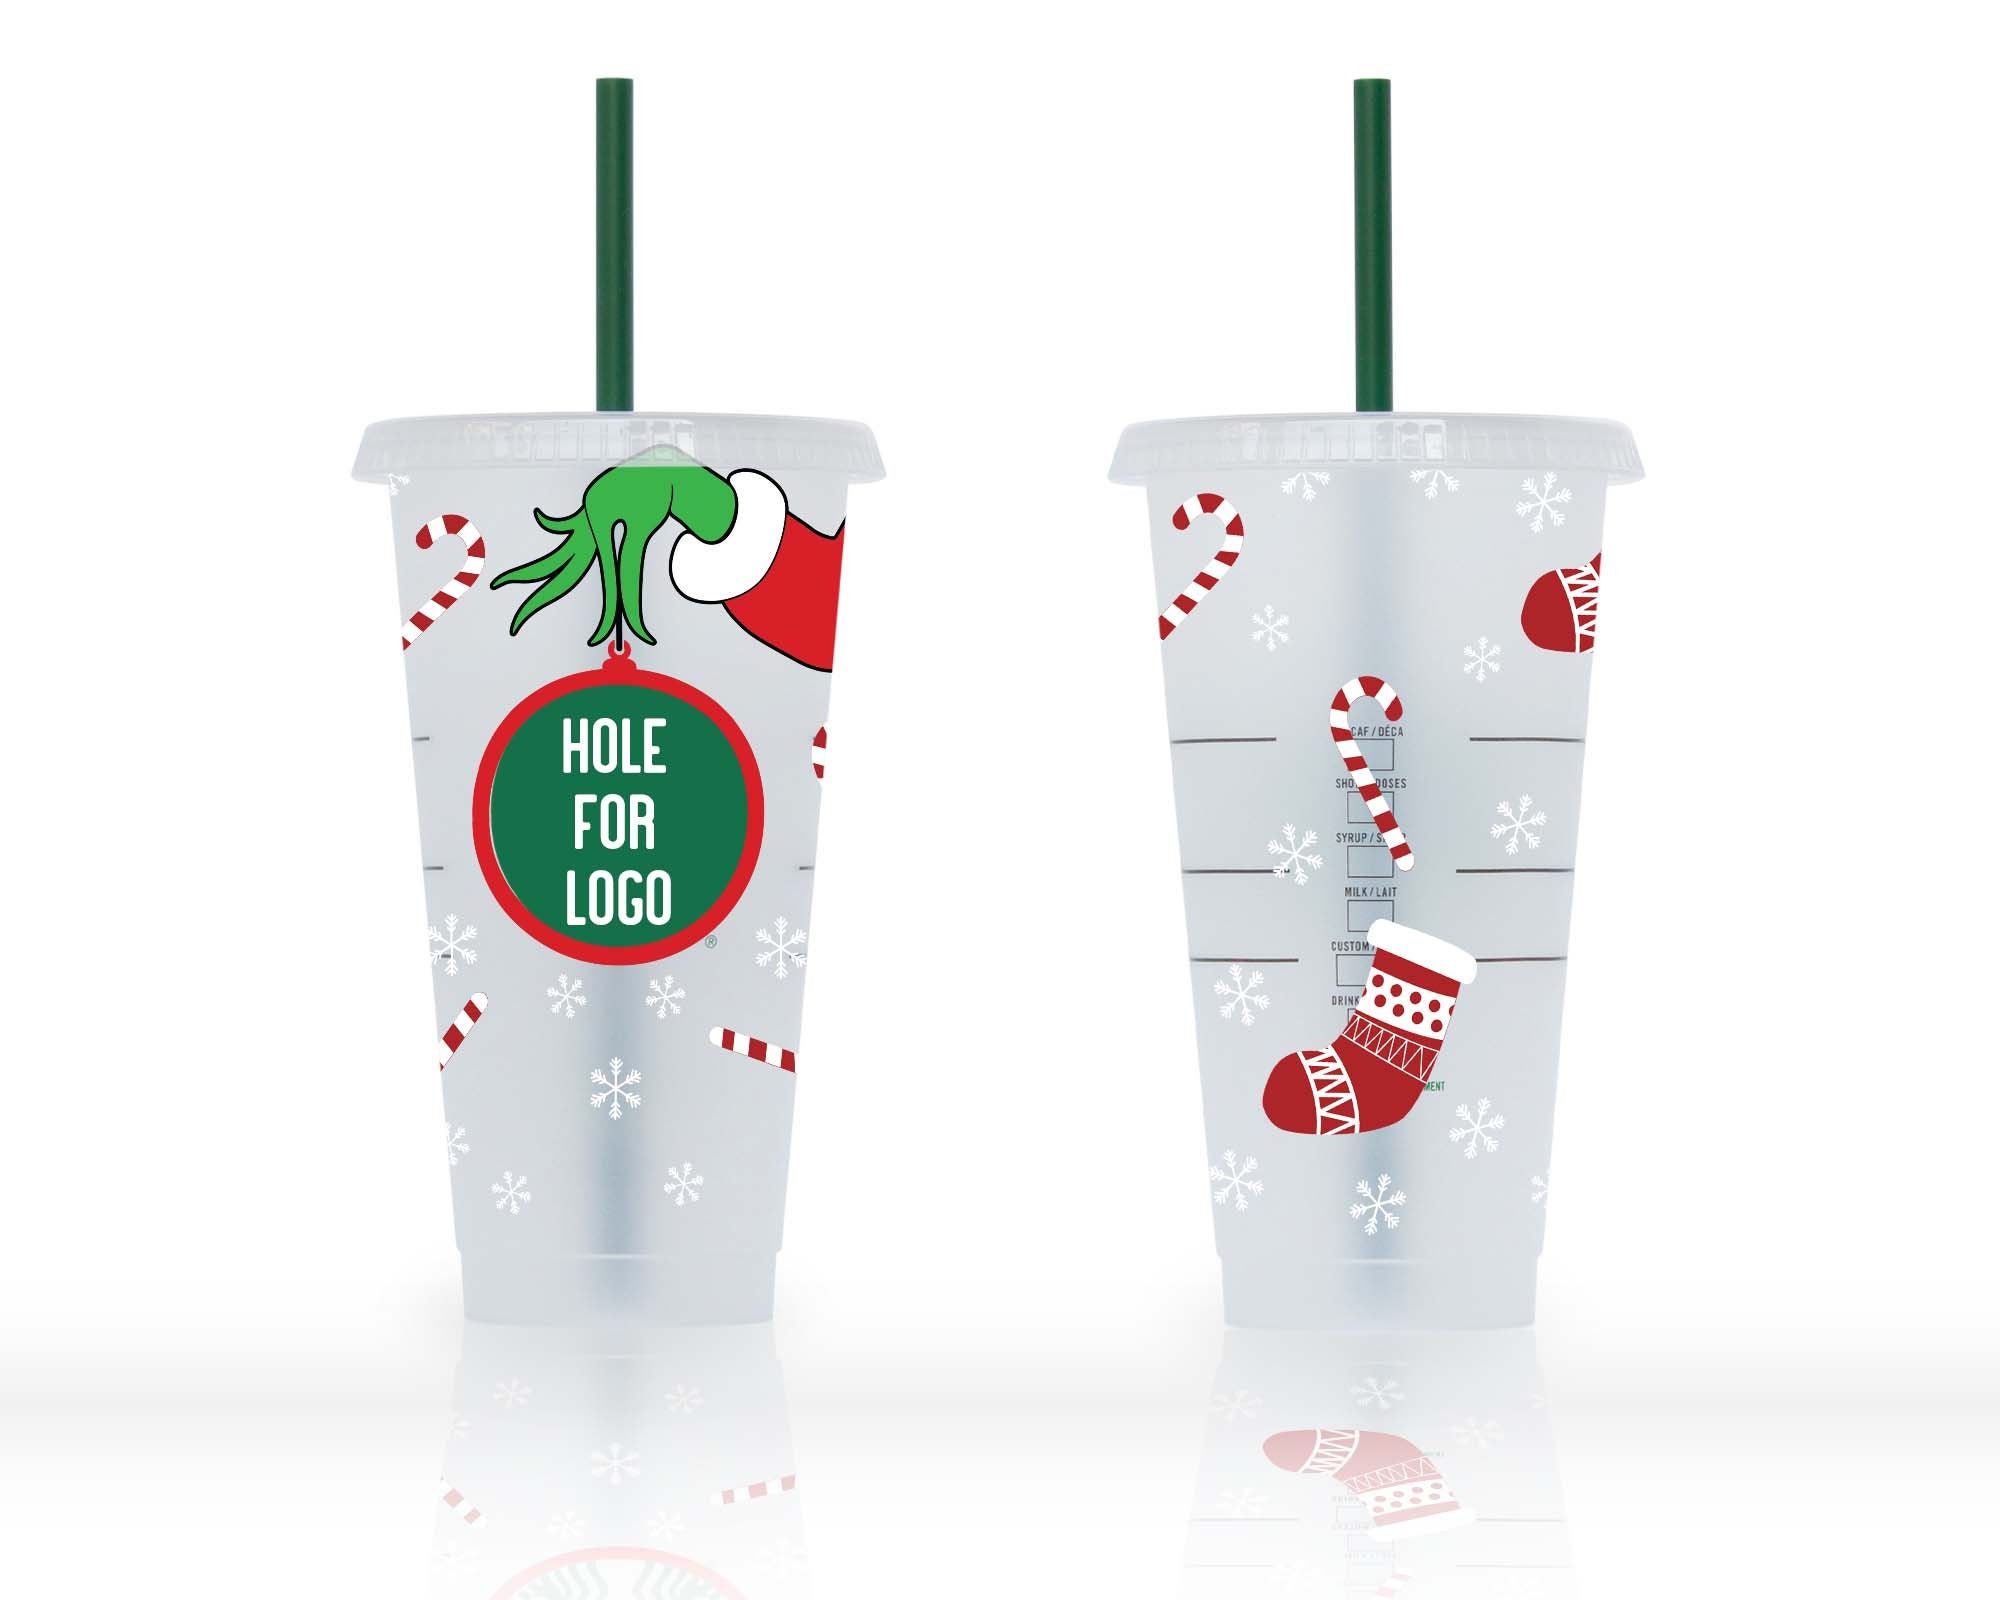 Green One Cold Cup Wrap SVG - Christmas Starbucks Cup Wrap SVG –  TheCraftyDrunkCo